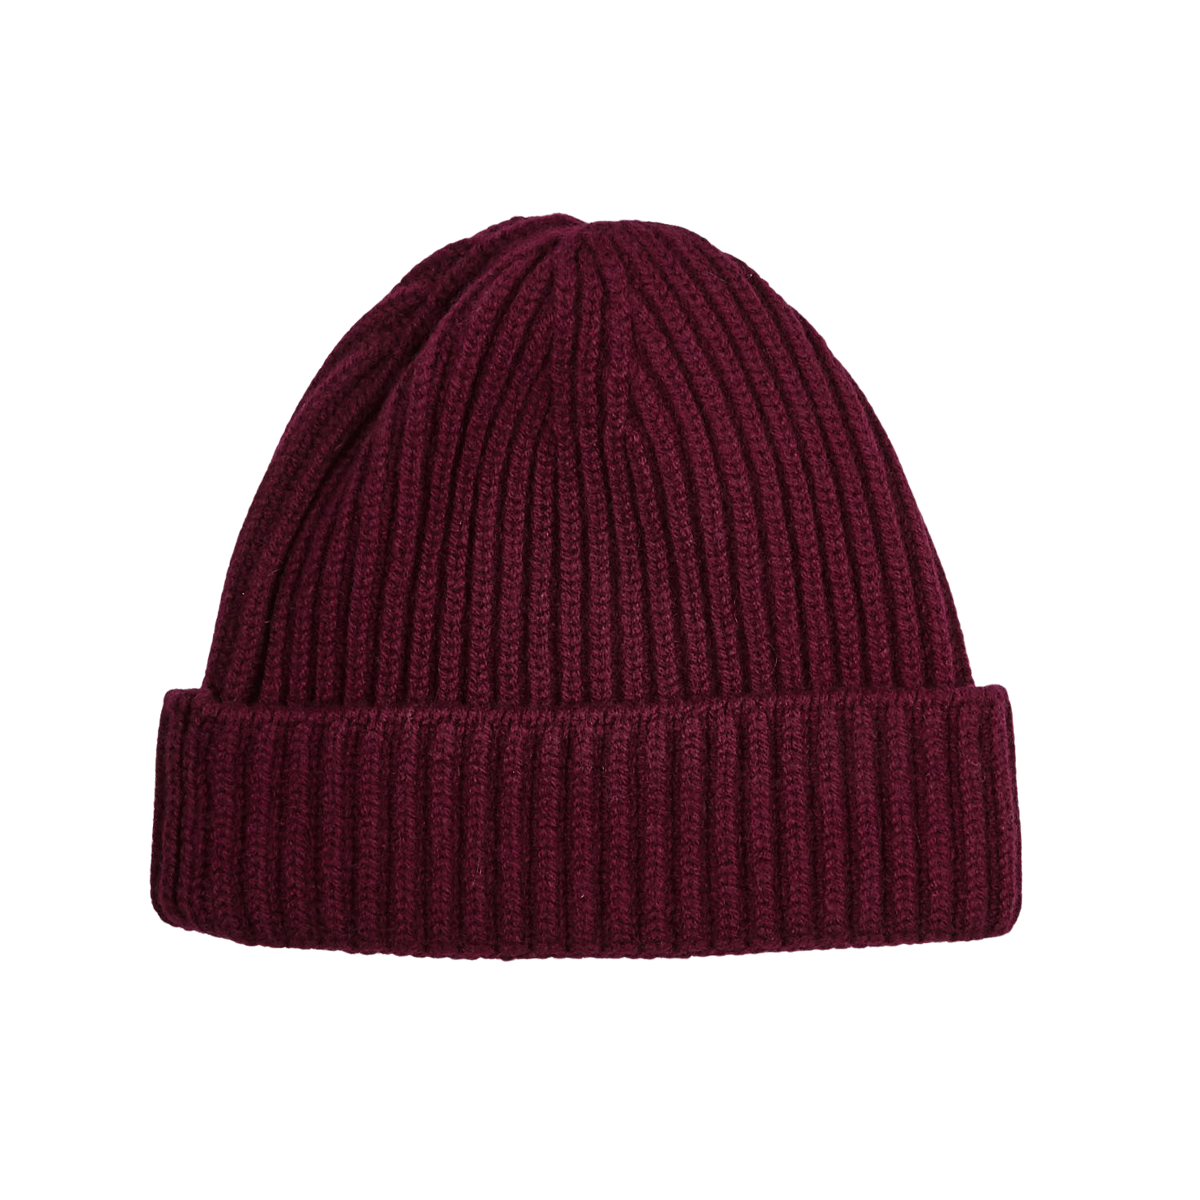 William Lockie Bordeaux Geelong Lambswool Ribbed Beanie Feature